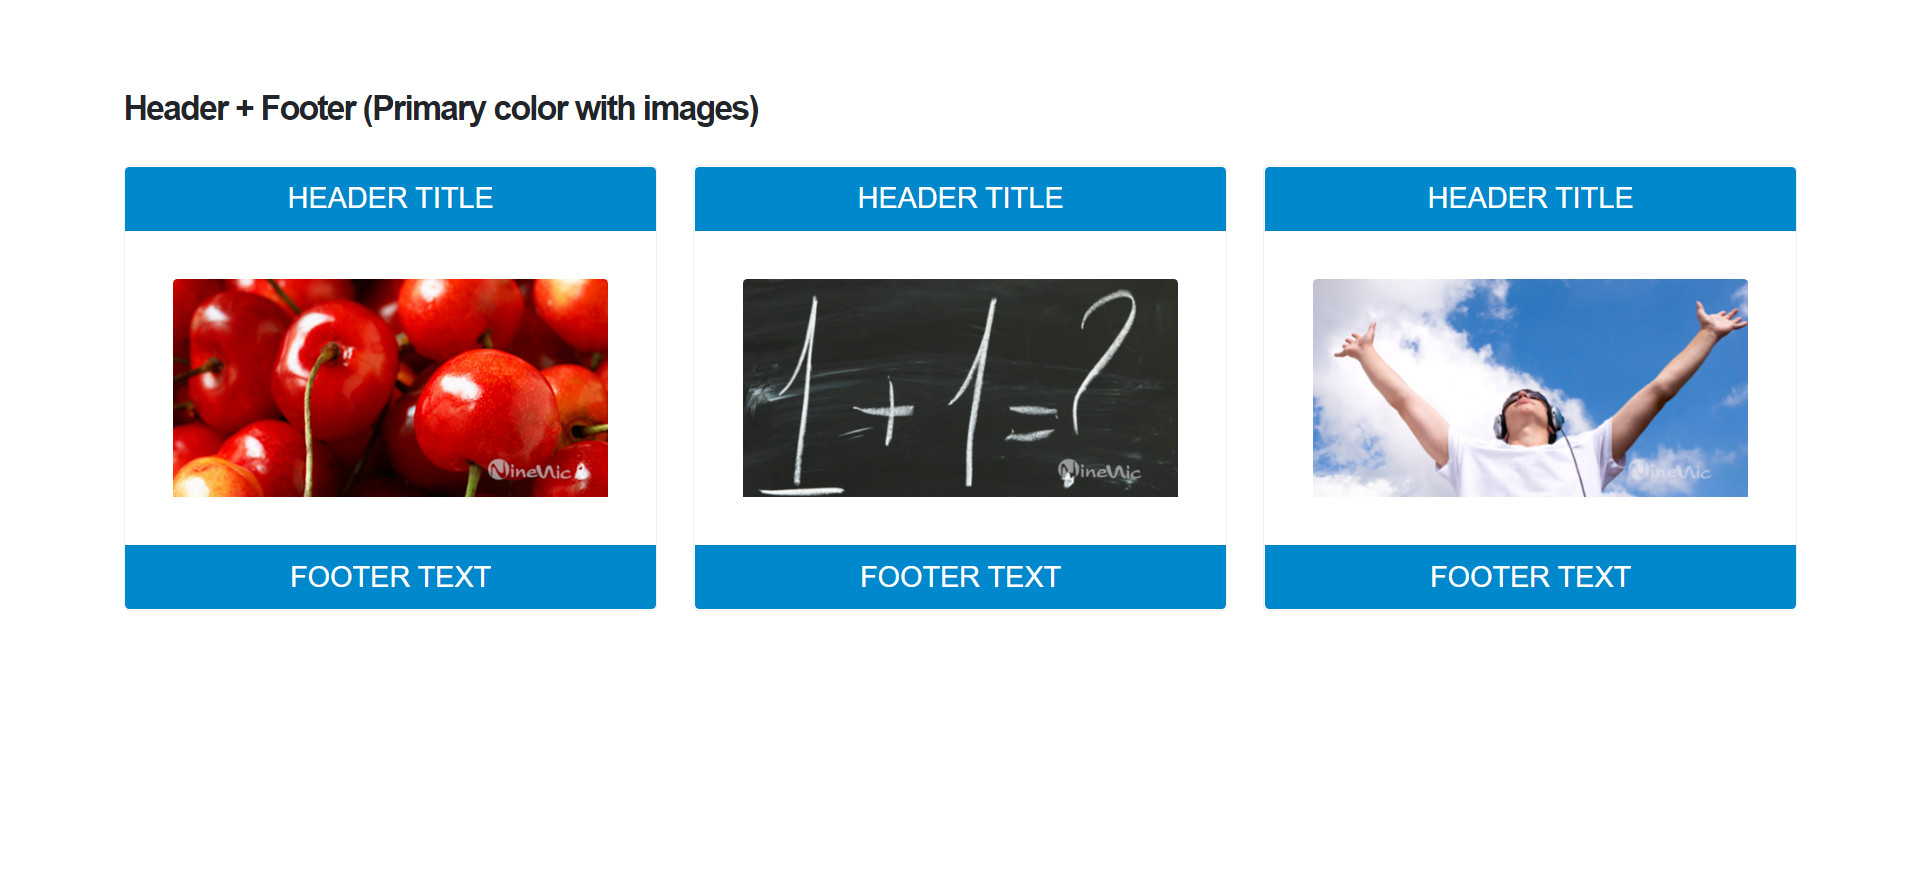 Shortcodes cards - header footer color primary and image แนะนำ เว็บไซต์สำเร็จรูป NineNIC